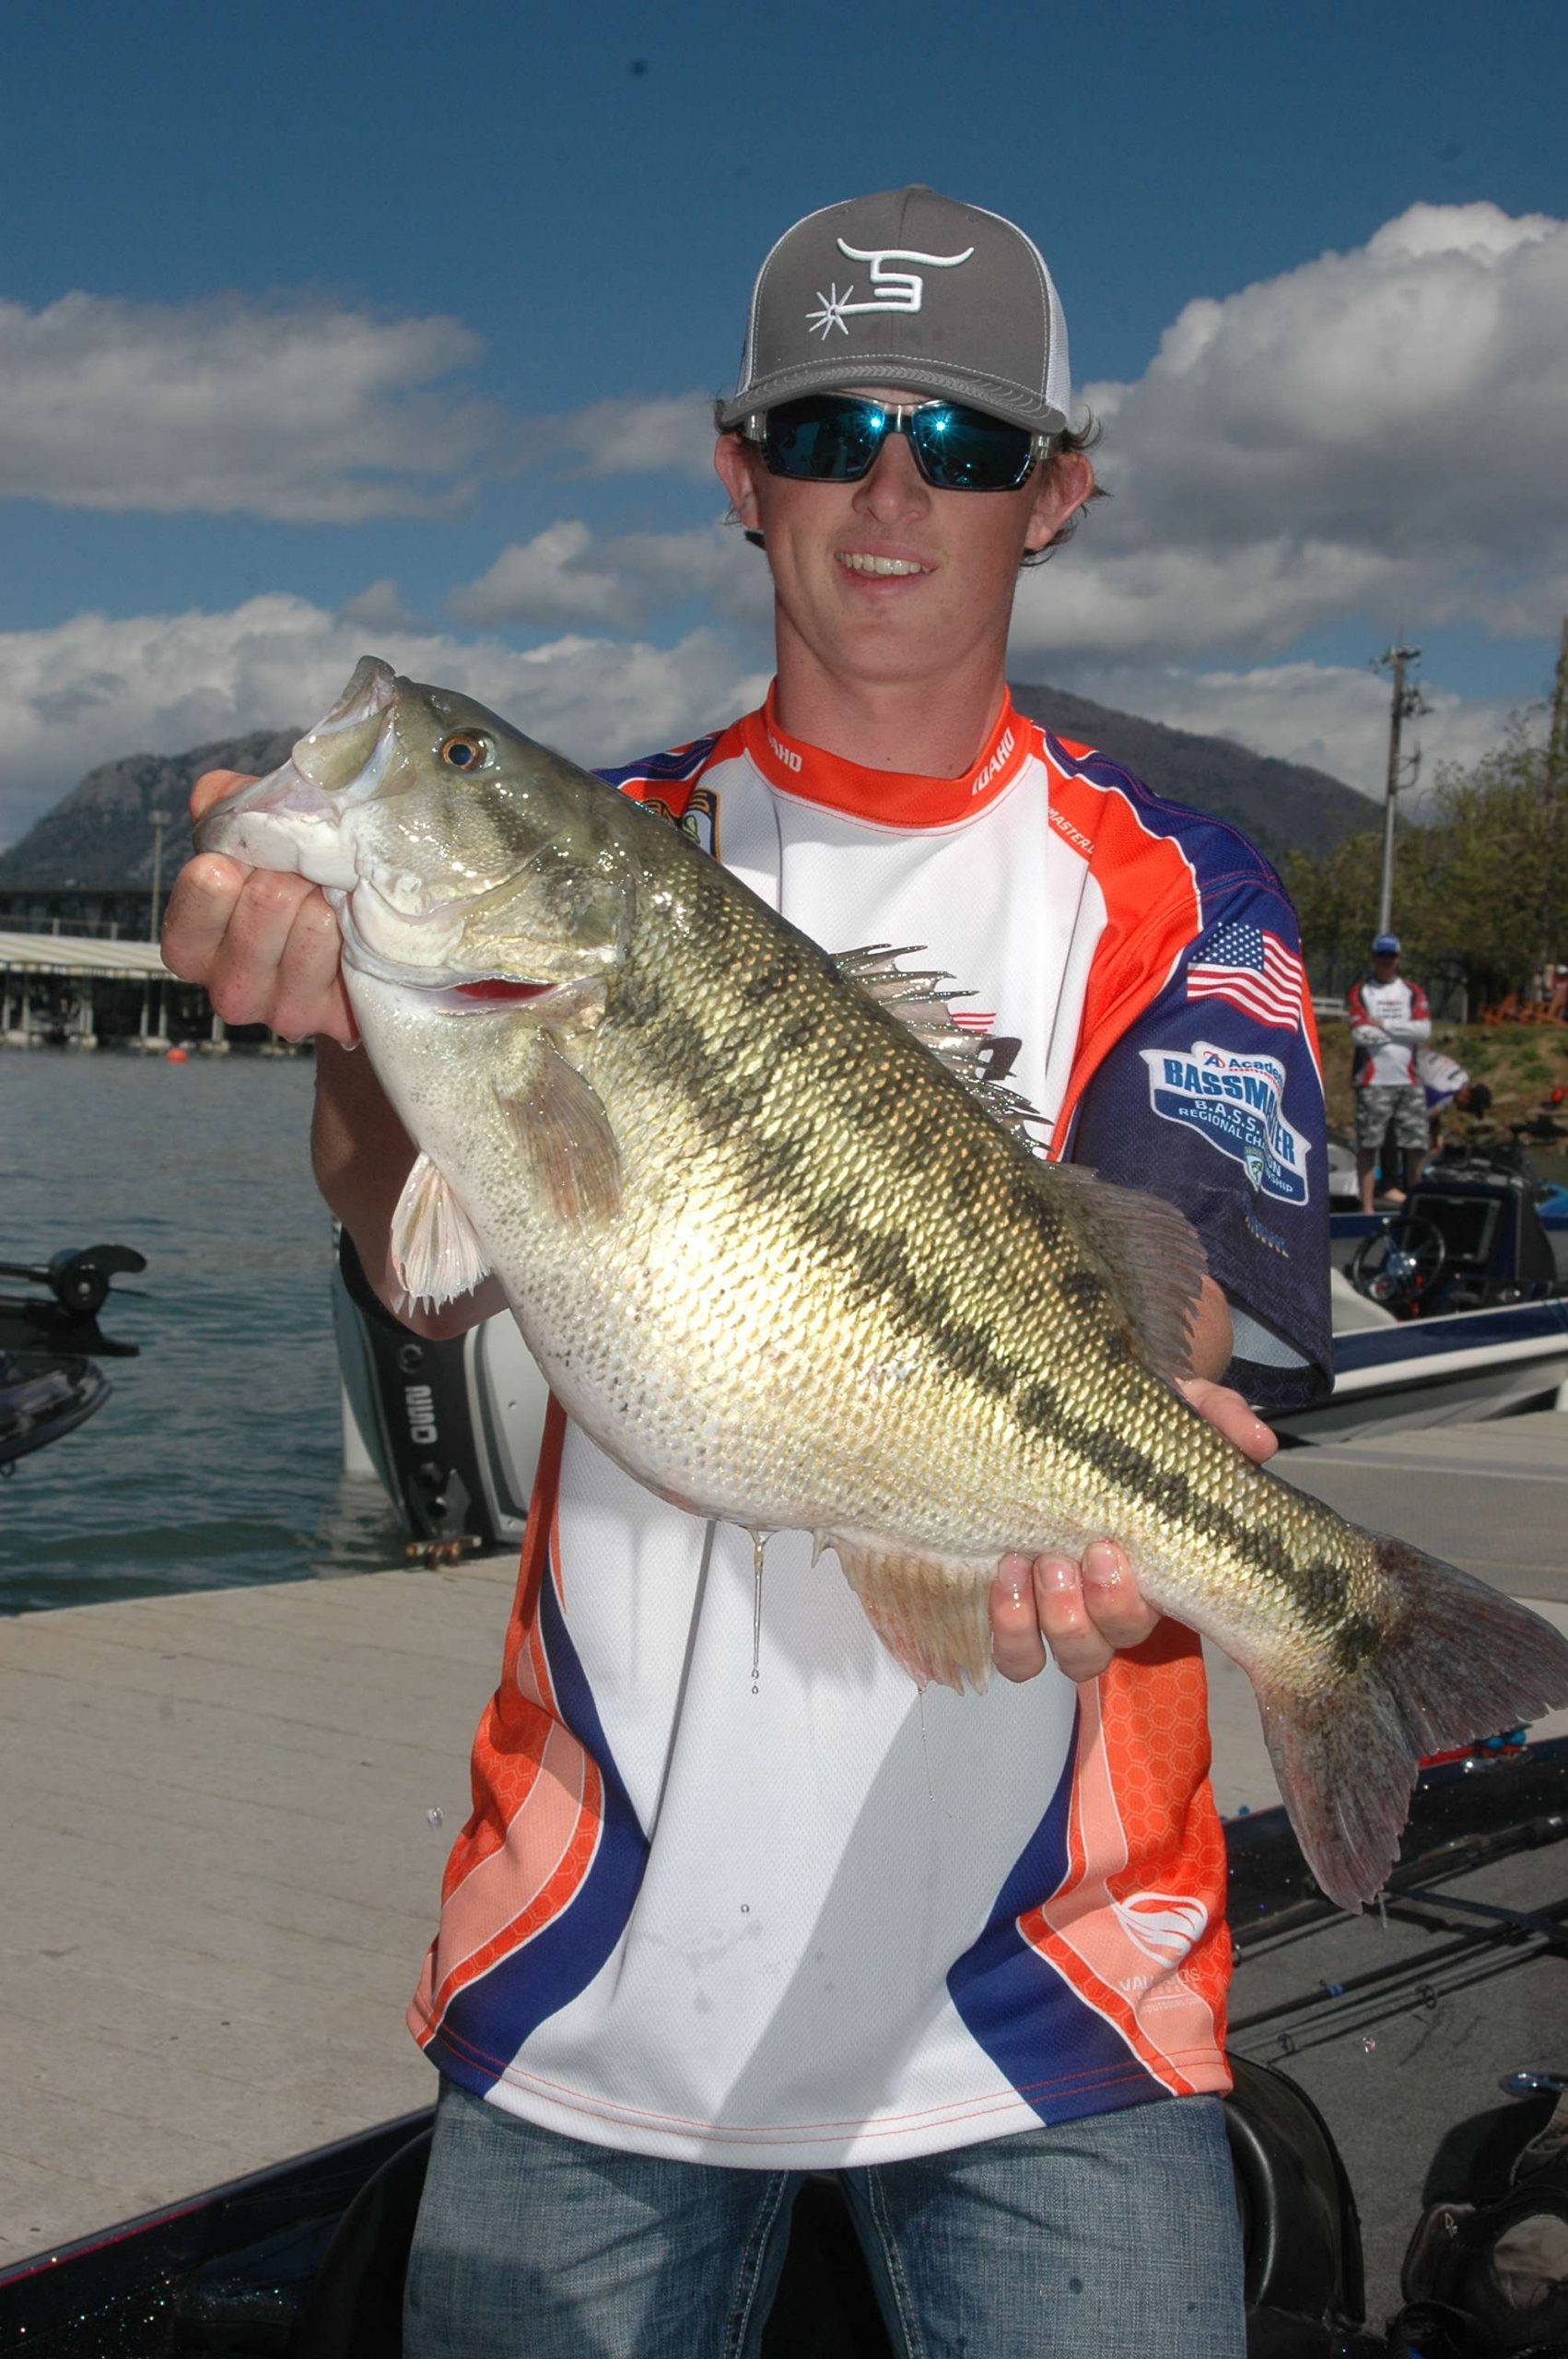 Bryson Mort on the Idaho B.A.S.S. Nation team caught the Big Bass the second day of the Shasta event. It weighed 8-pounds, 5-ounces.